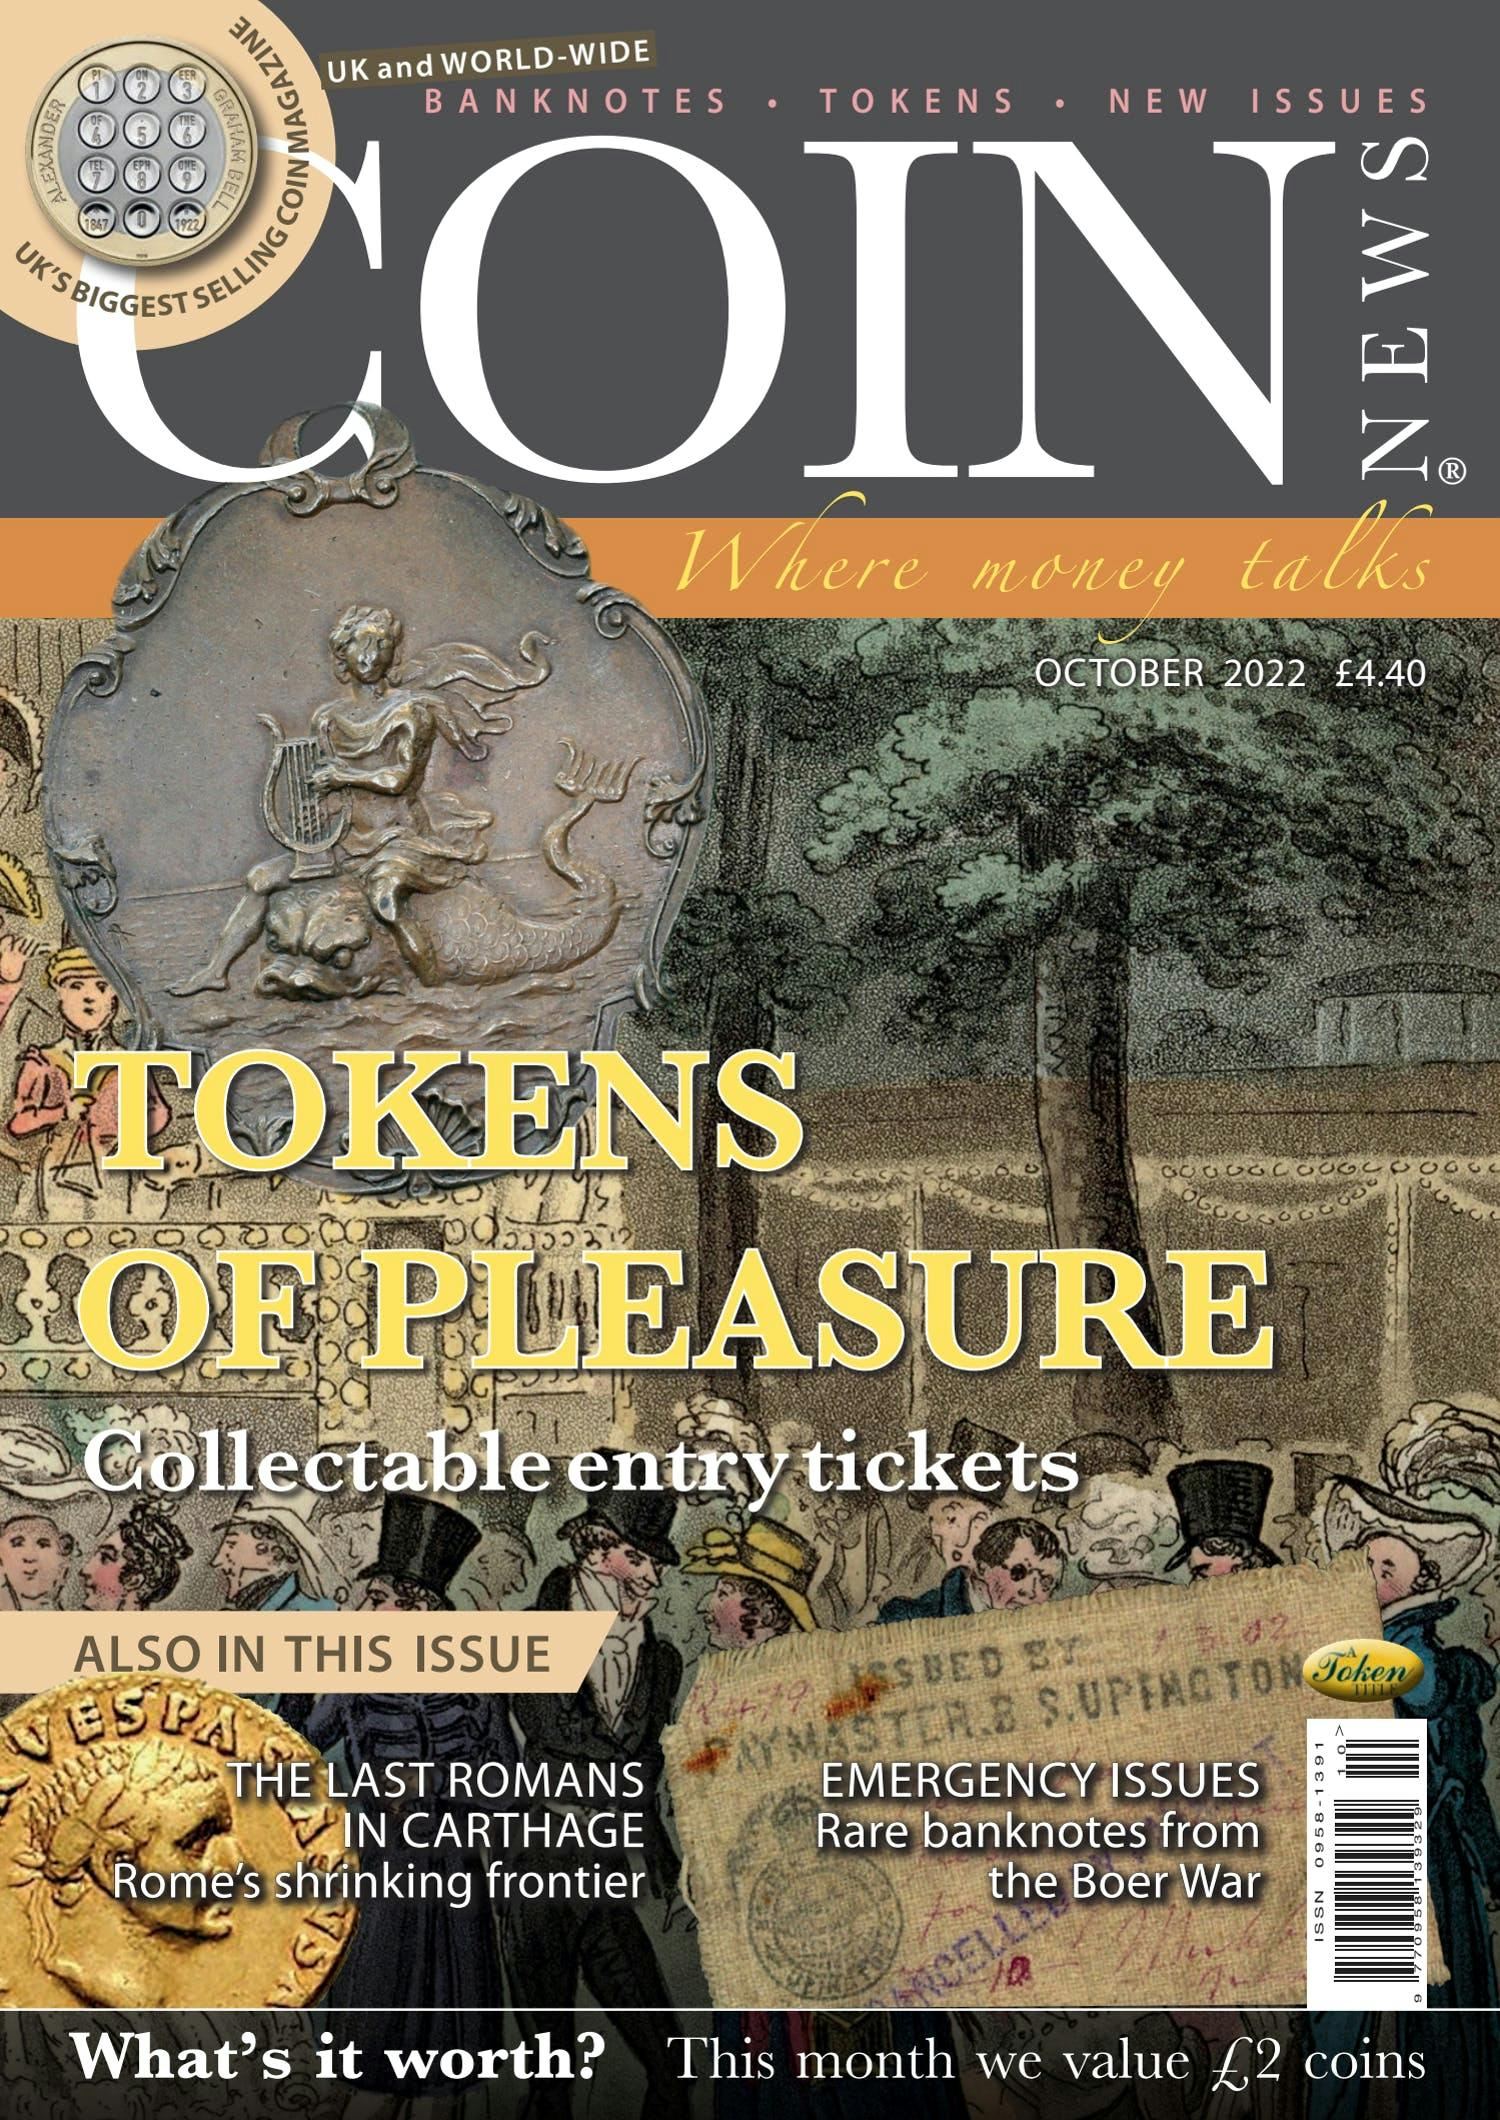 The front cover of Coin News, October 2022 - Volume 59, Number 10